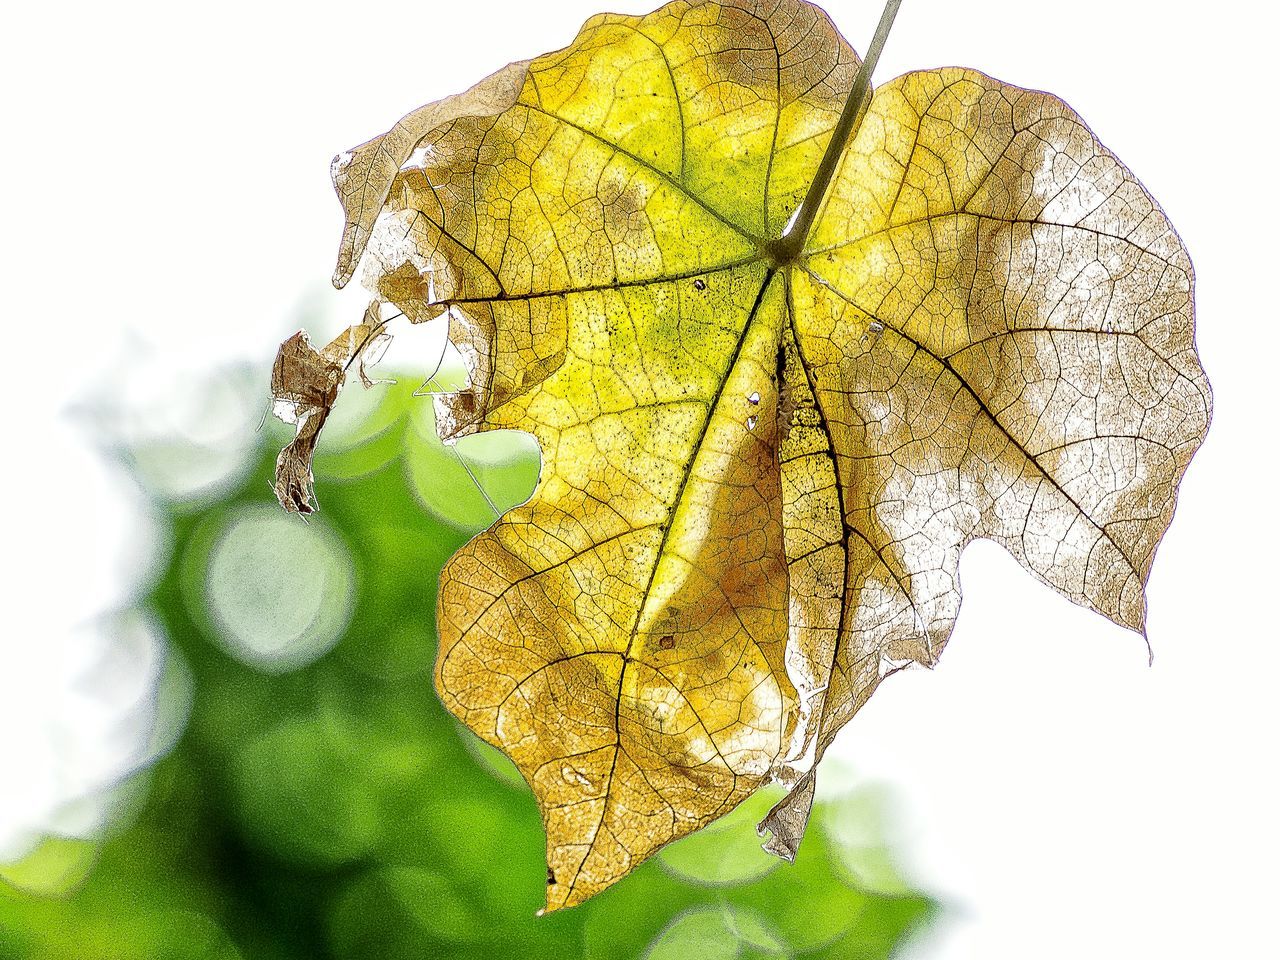 CLOSE-UP OF YELLOW LEAVES